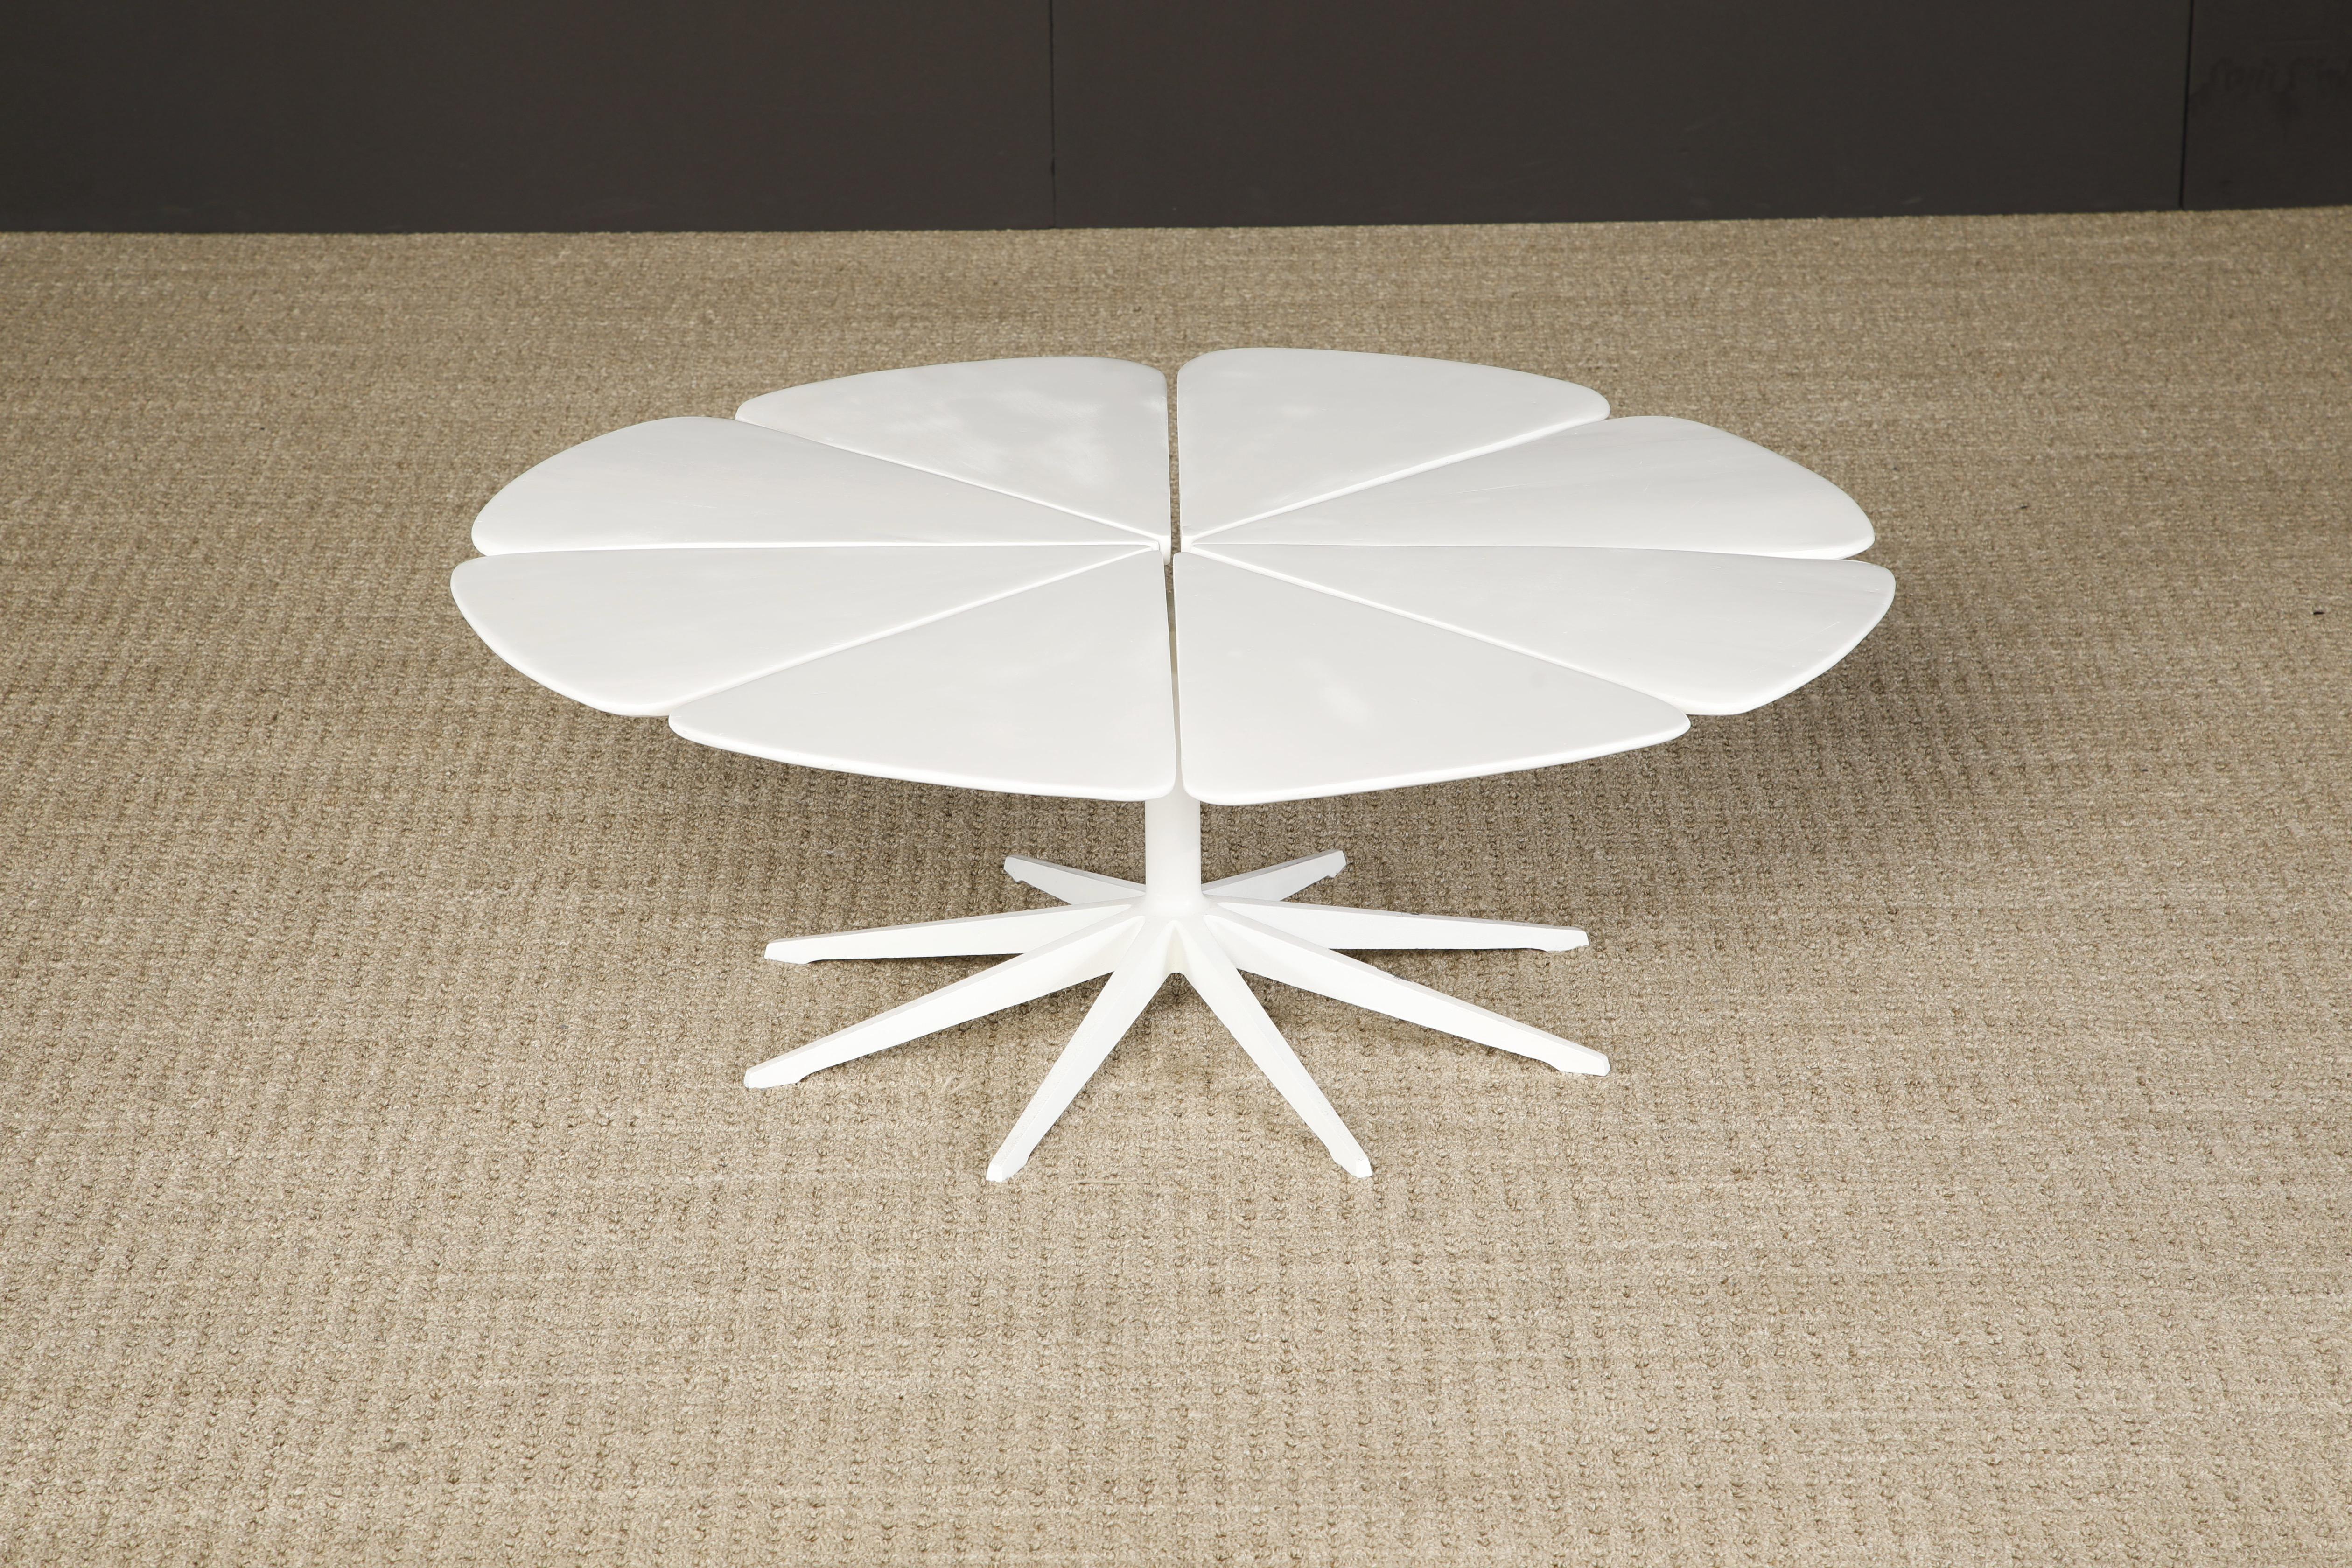 This early production 'Petal' coffee table by Richard Schultz for Knoll International, designed in 1960, is a favorite amongst Mid-Century Modern collectors and enthusiasts. Schultz designed the Petal series, with dining, coffee, and side table size